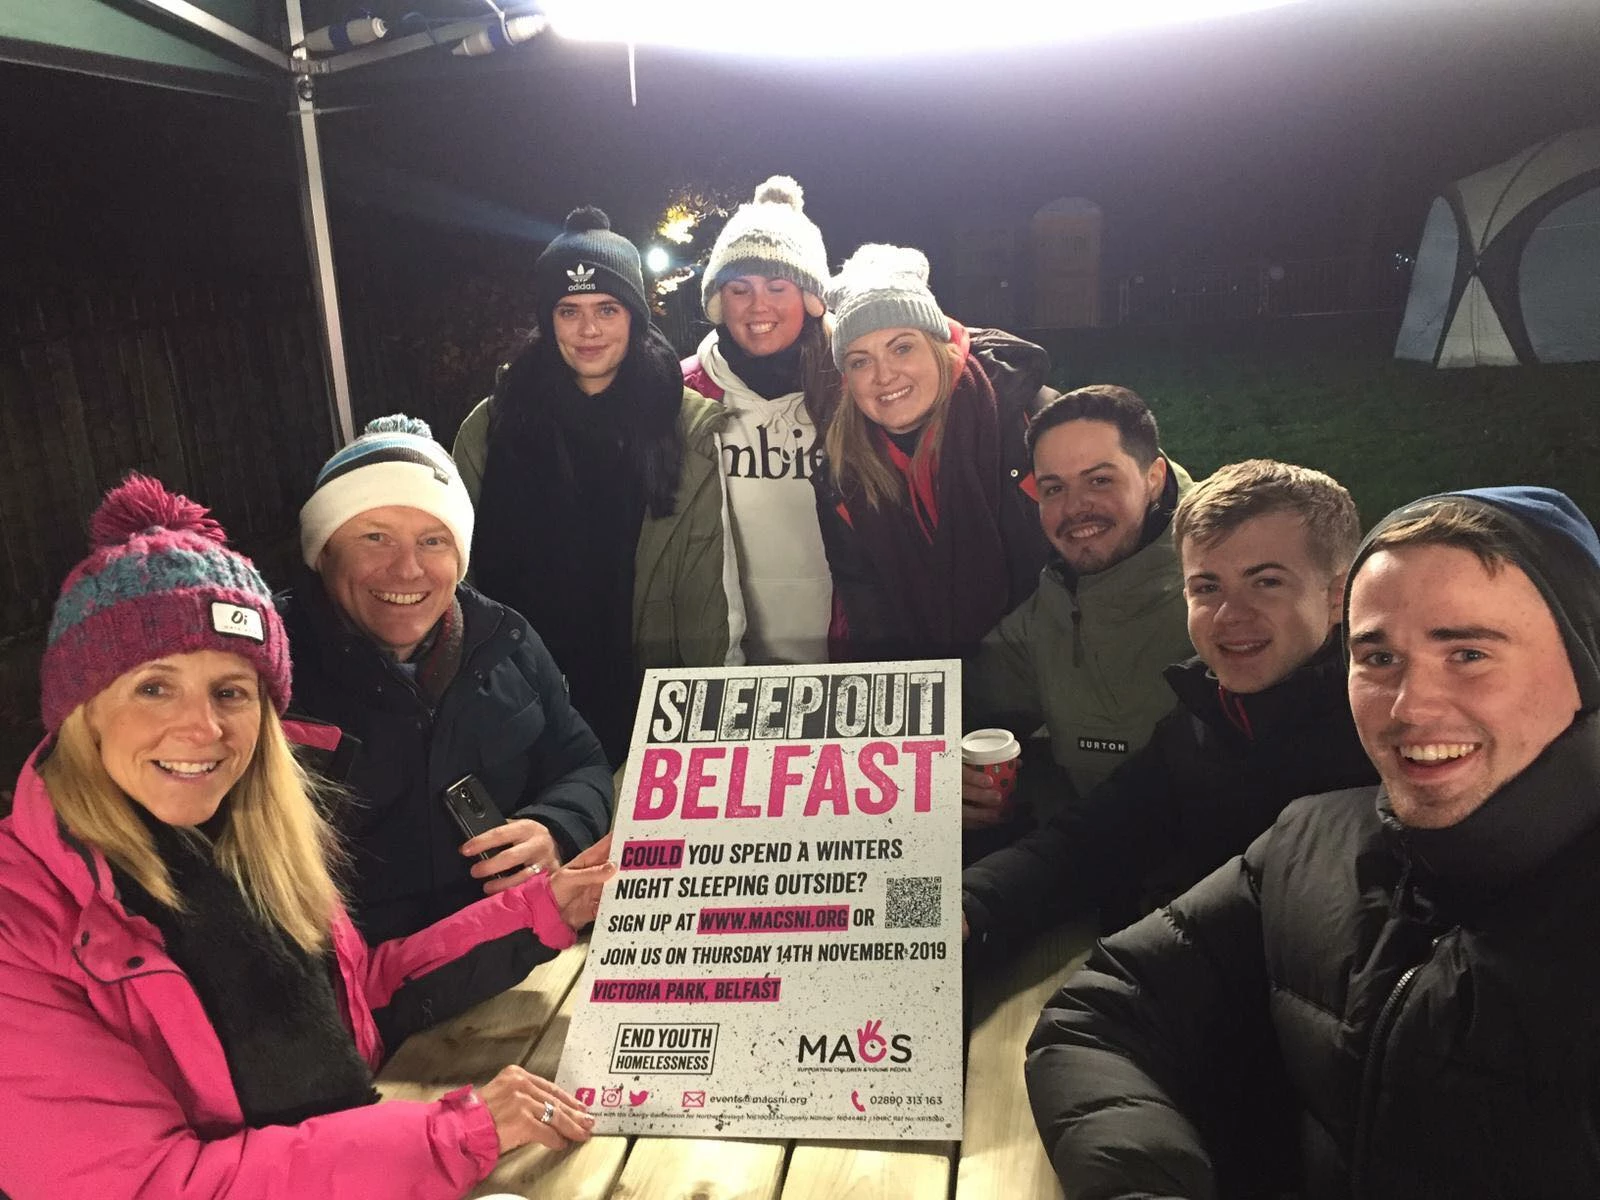  Hays employees taking part in sleep out events in Belfast